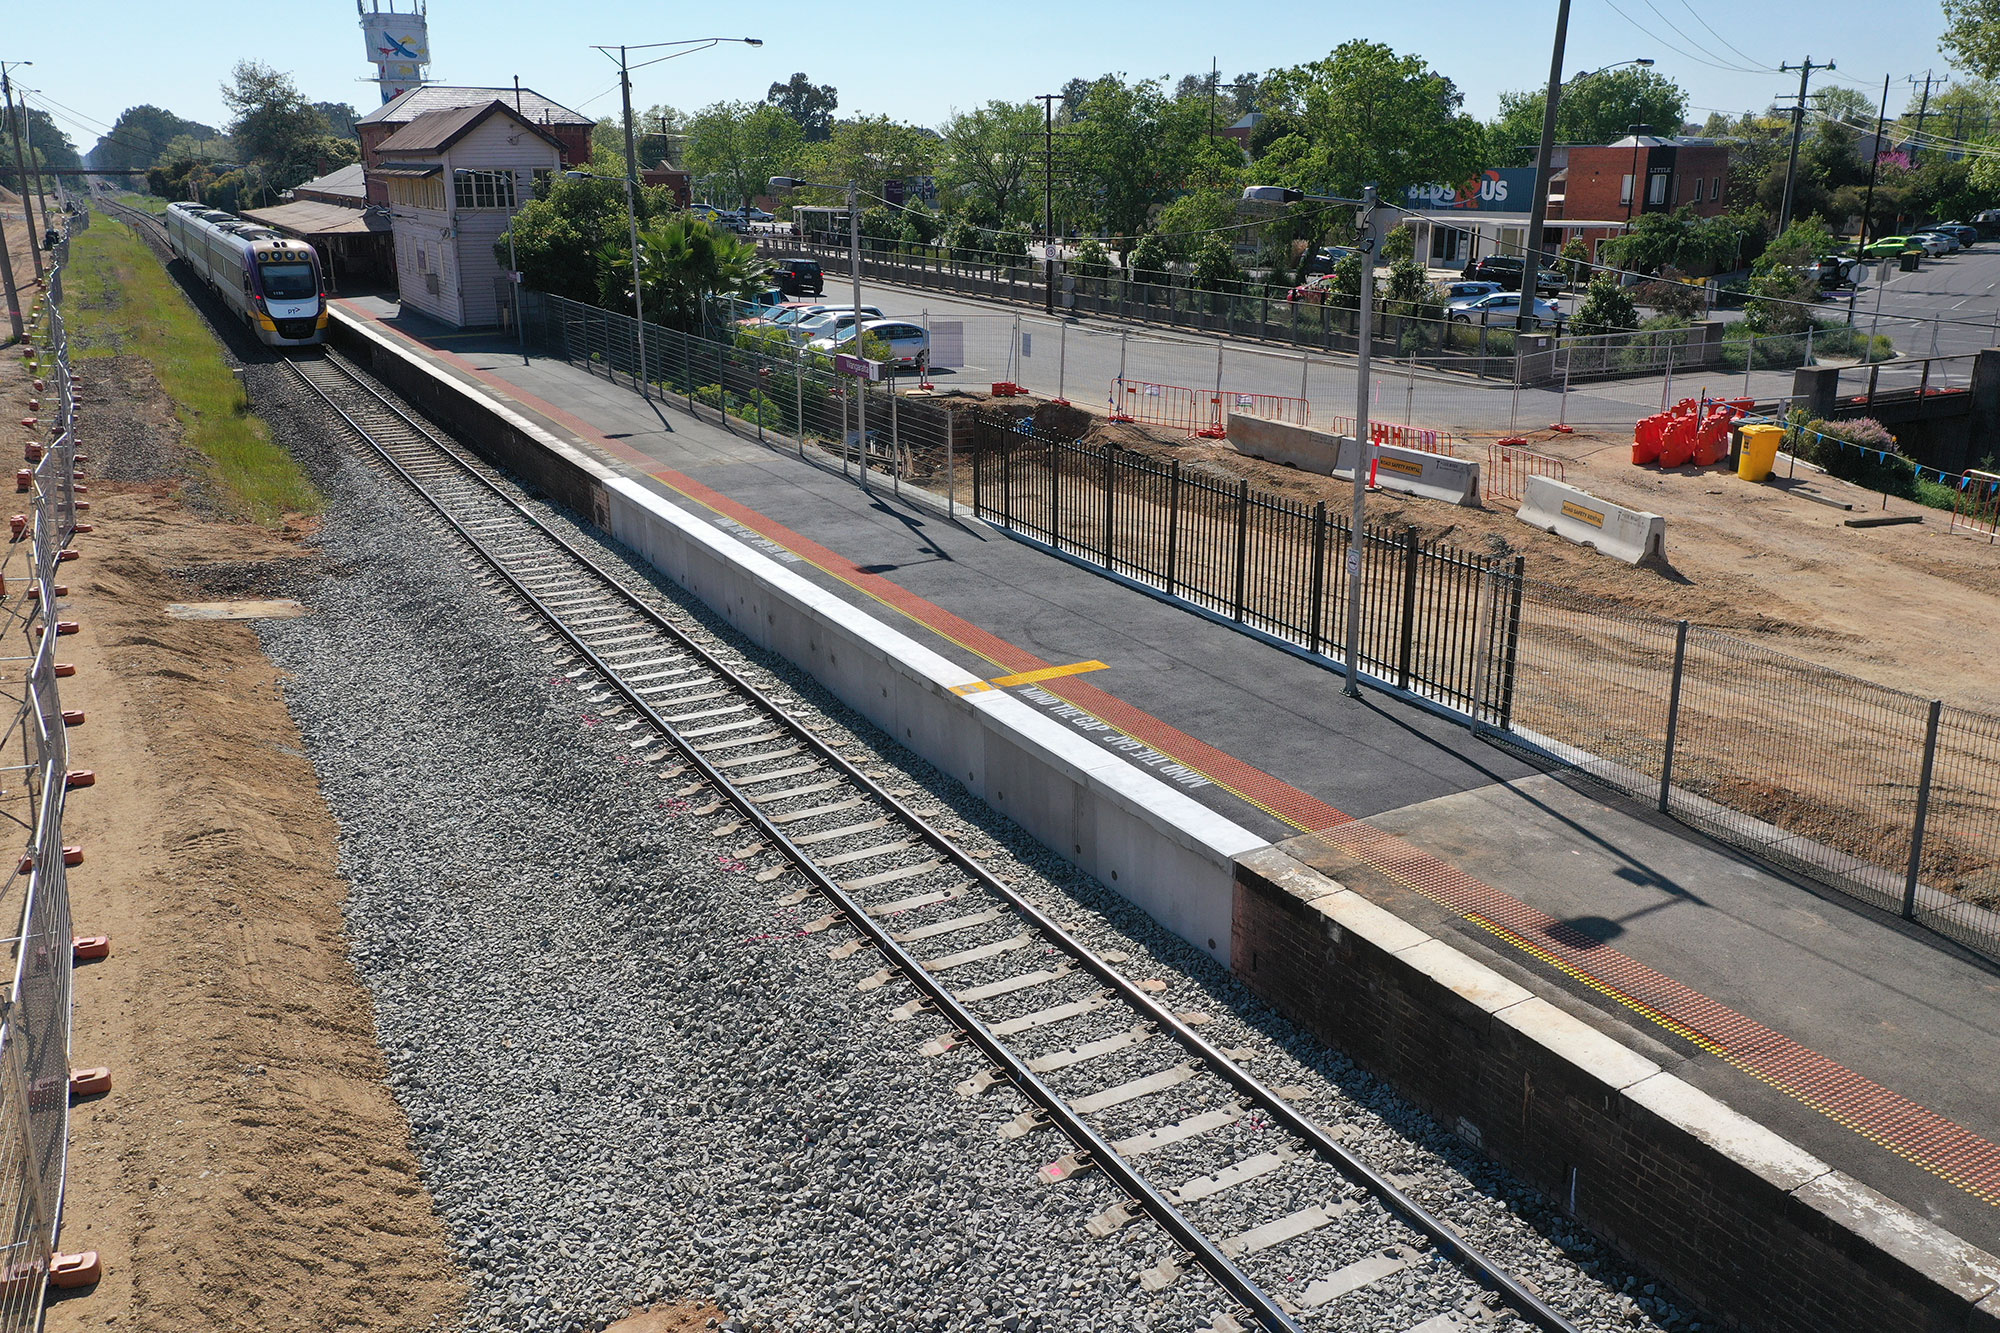 The Wangaratta Station platform and track are re-instated with the underpass now installed